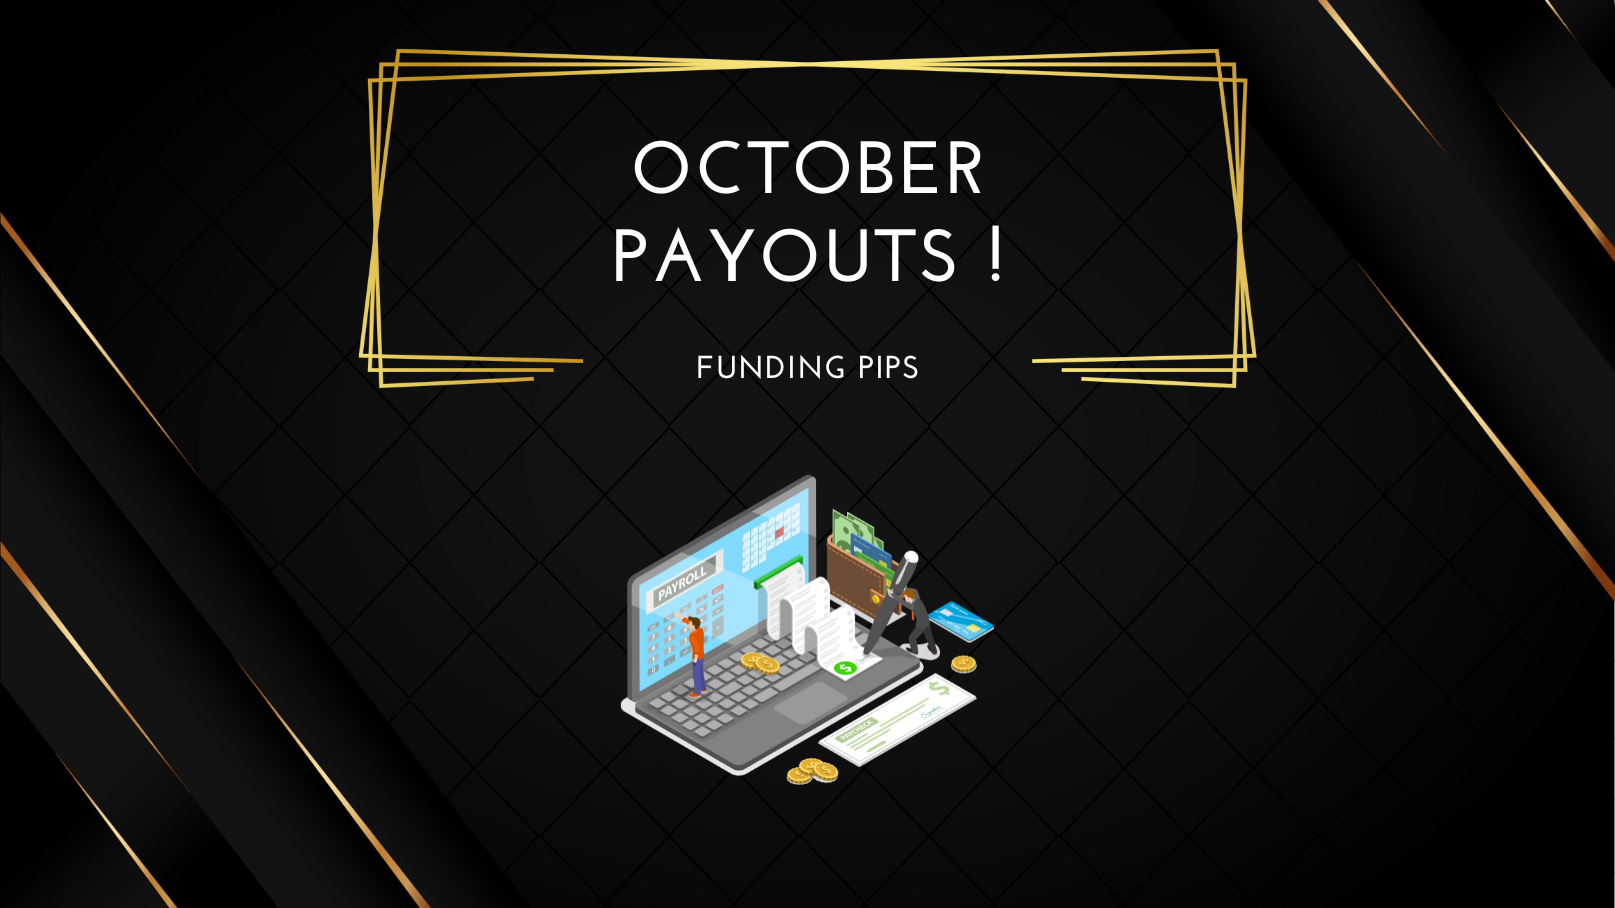 Funding Pips October Payouts